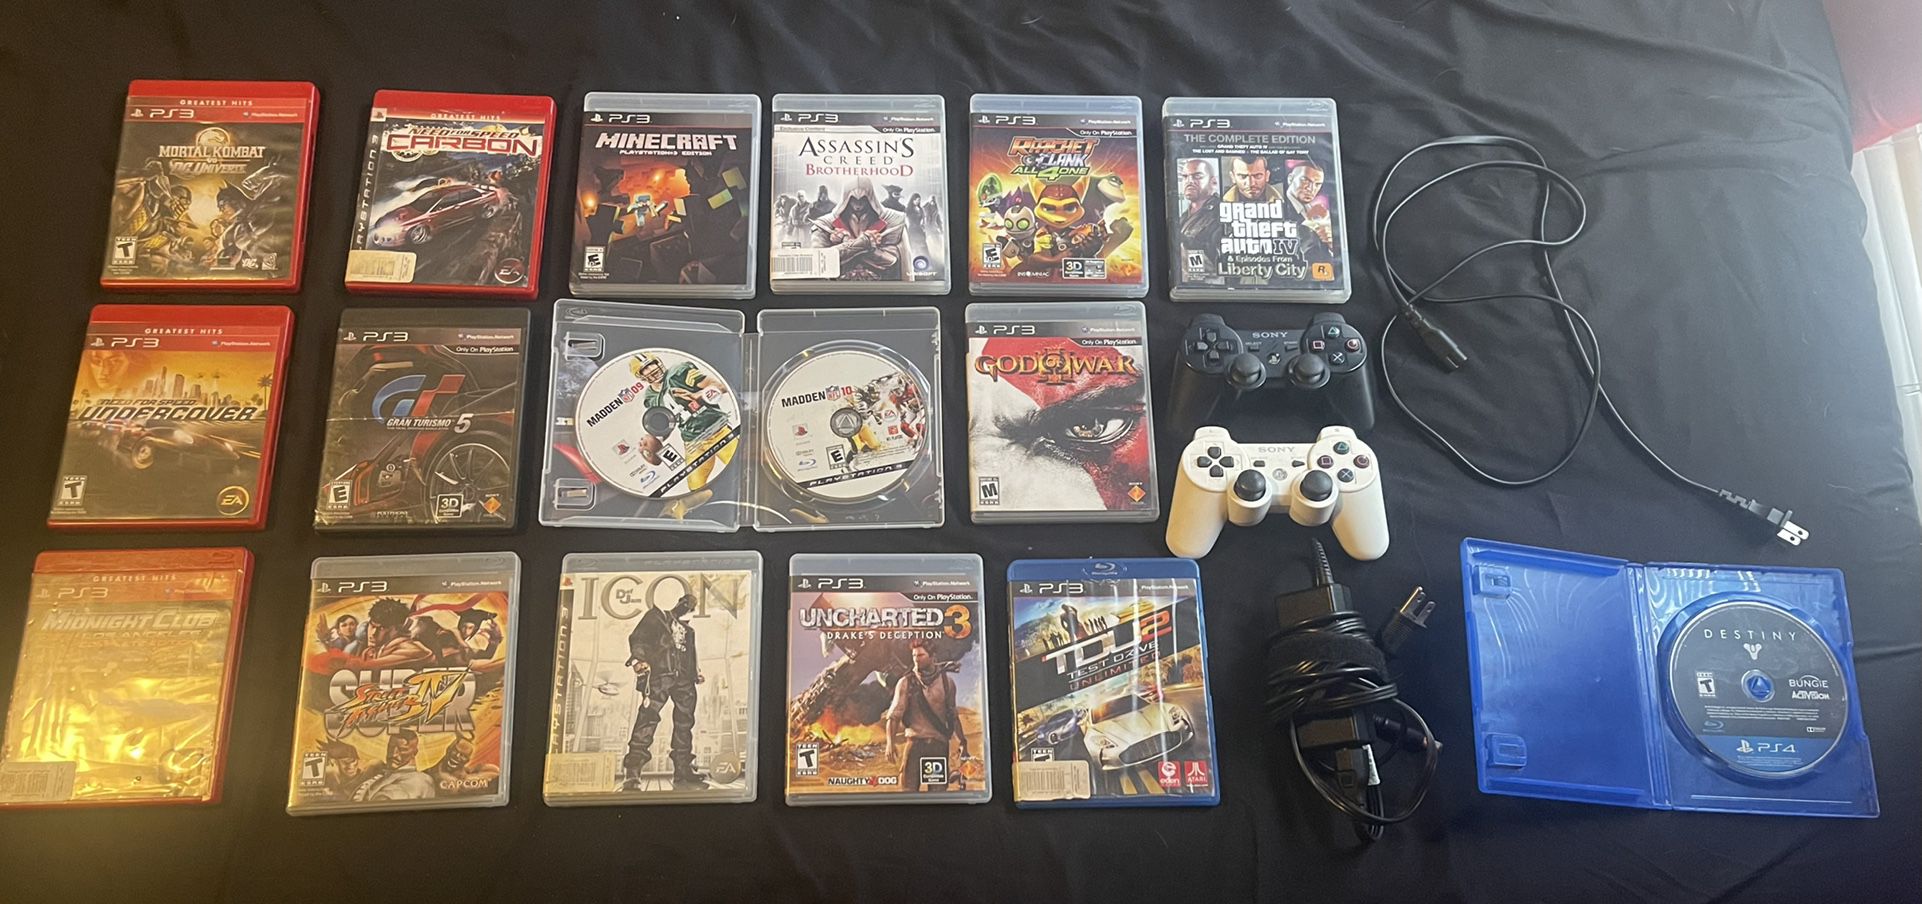 17 PlayStation 3 dis games + Both black and white controllers with power cord and HDMI Cord 